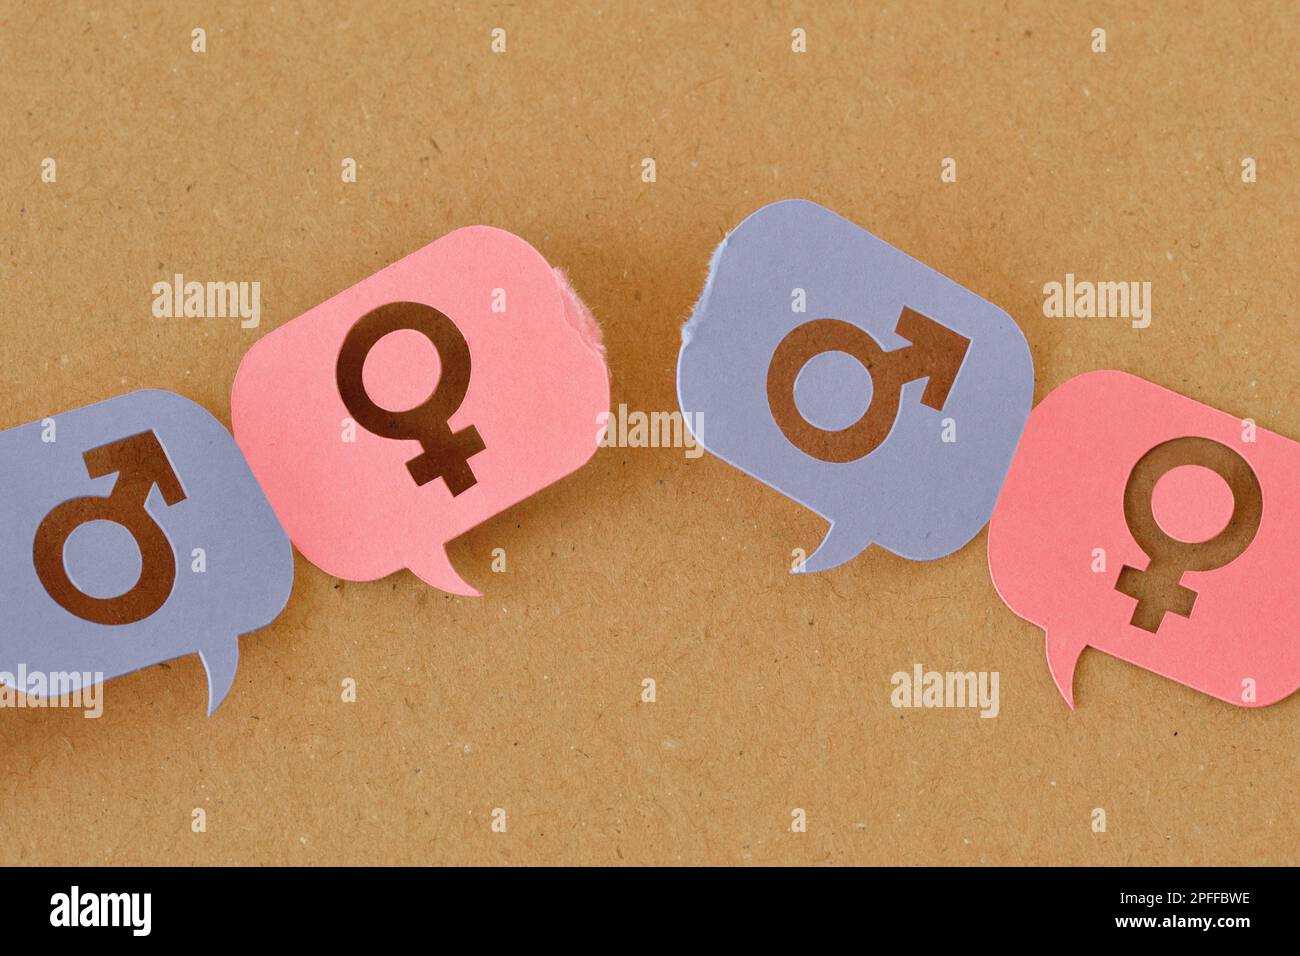 Broken chain of pink and blue speech bubbles with female and male gender symbol - Concept of communication differences between men and women (gender c Stock Photo